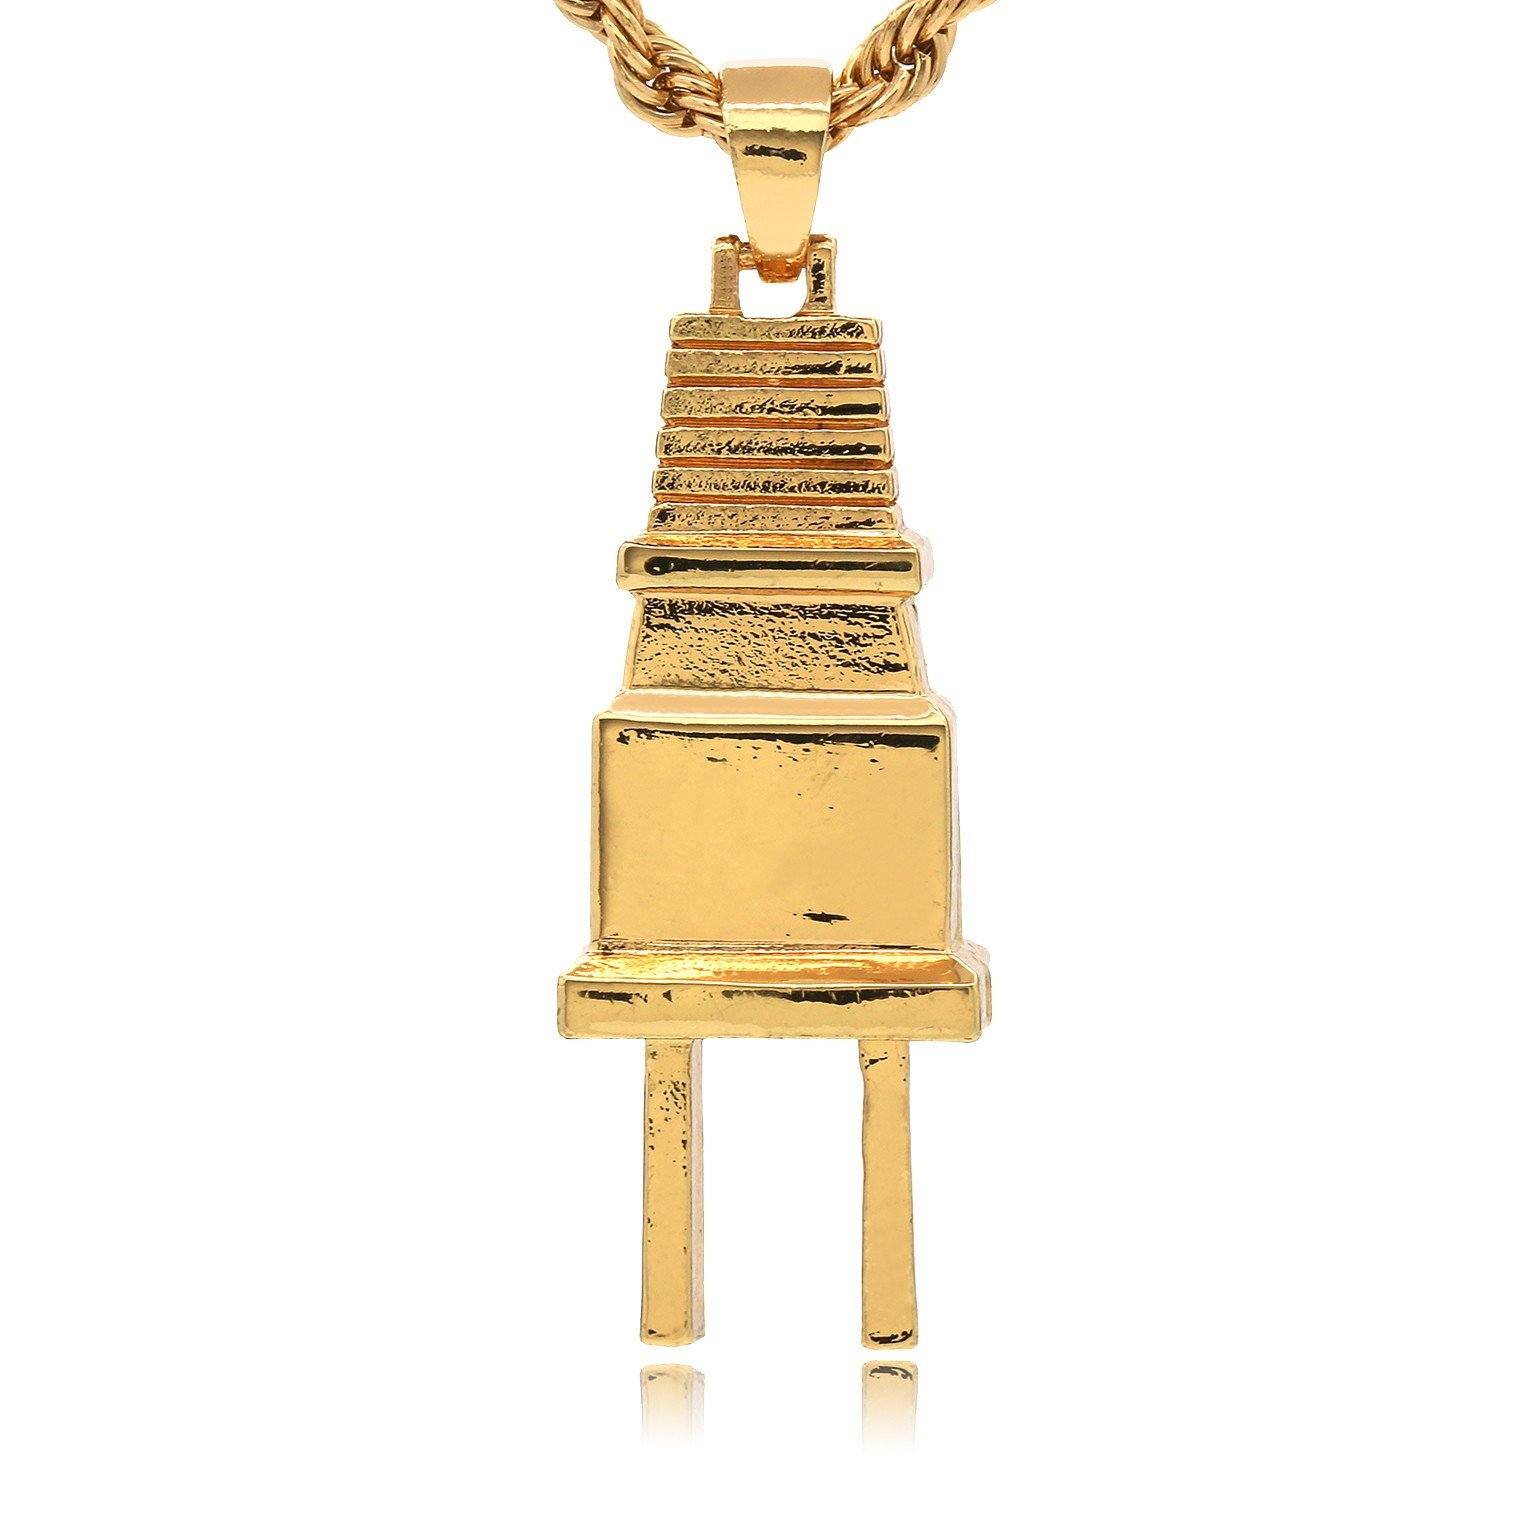 PLAIN PLUG PENDANT WITH GOLD ROPE CHAIN